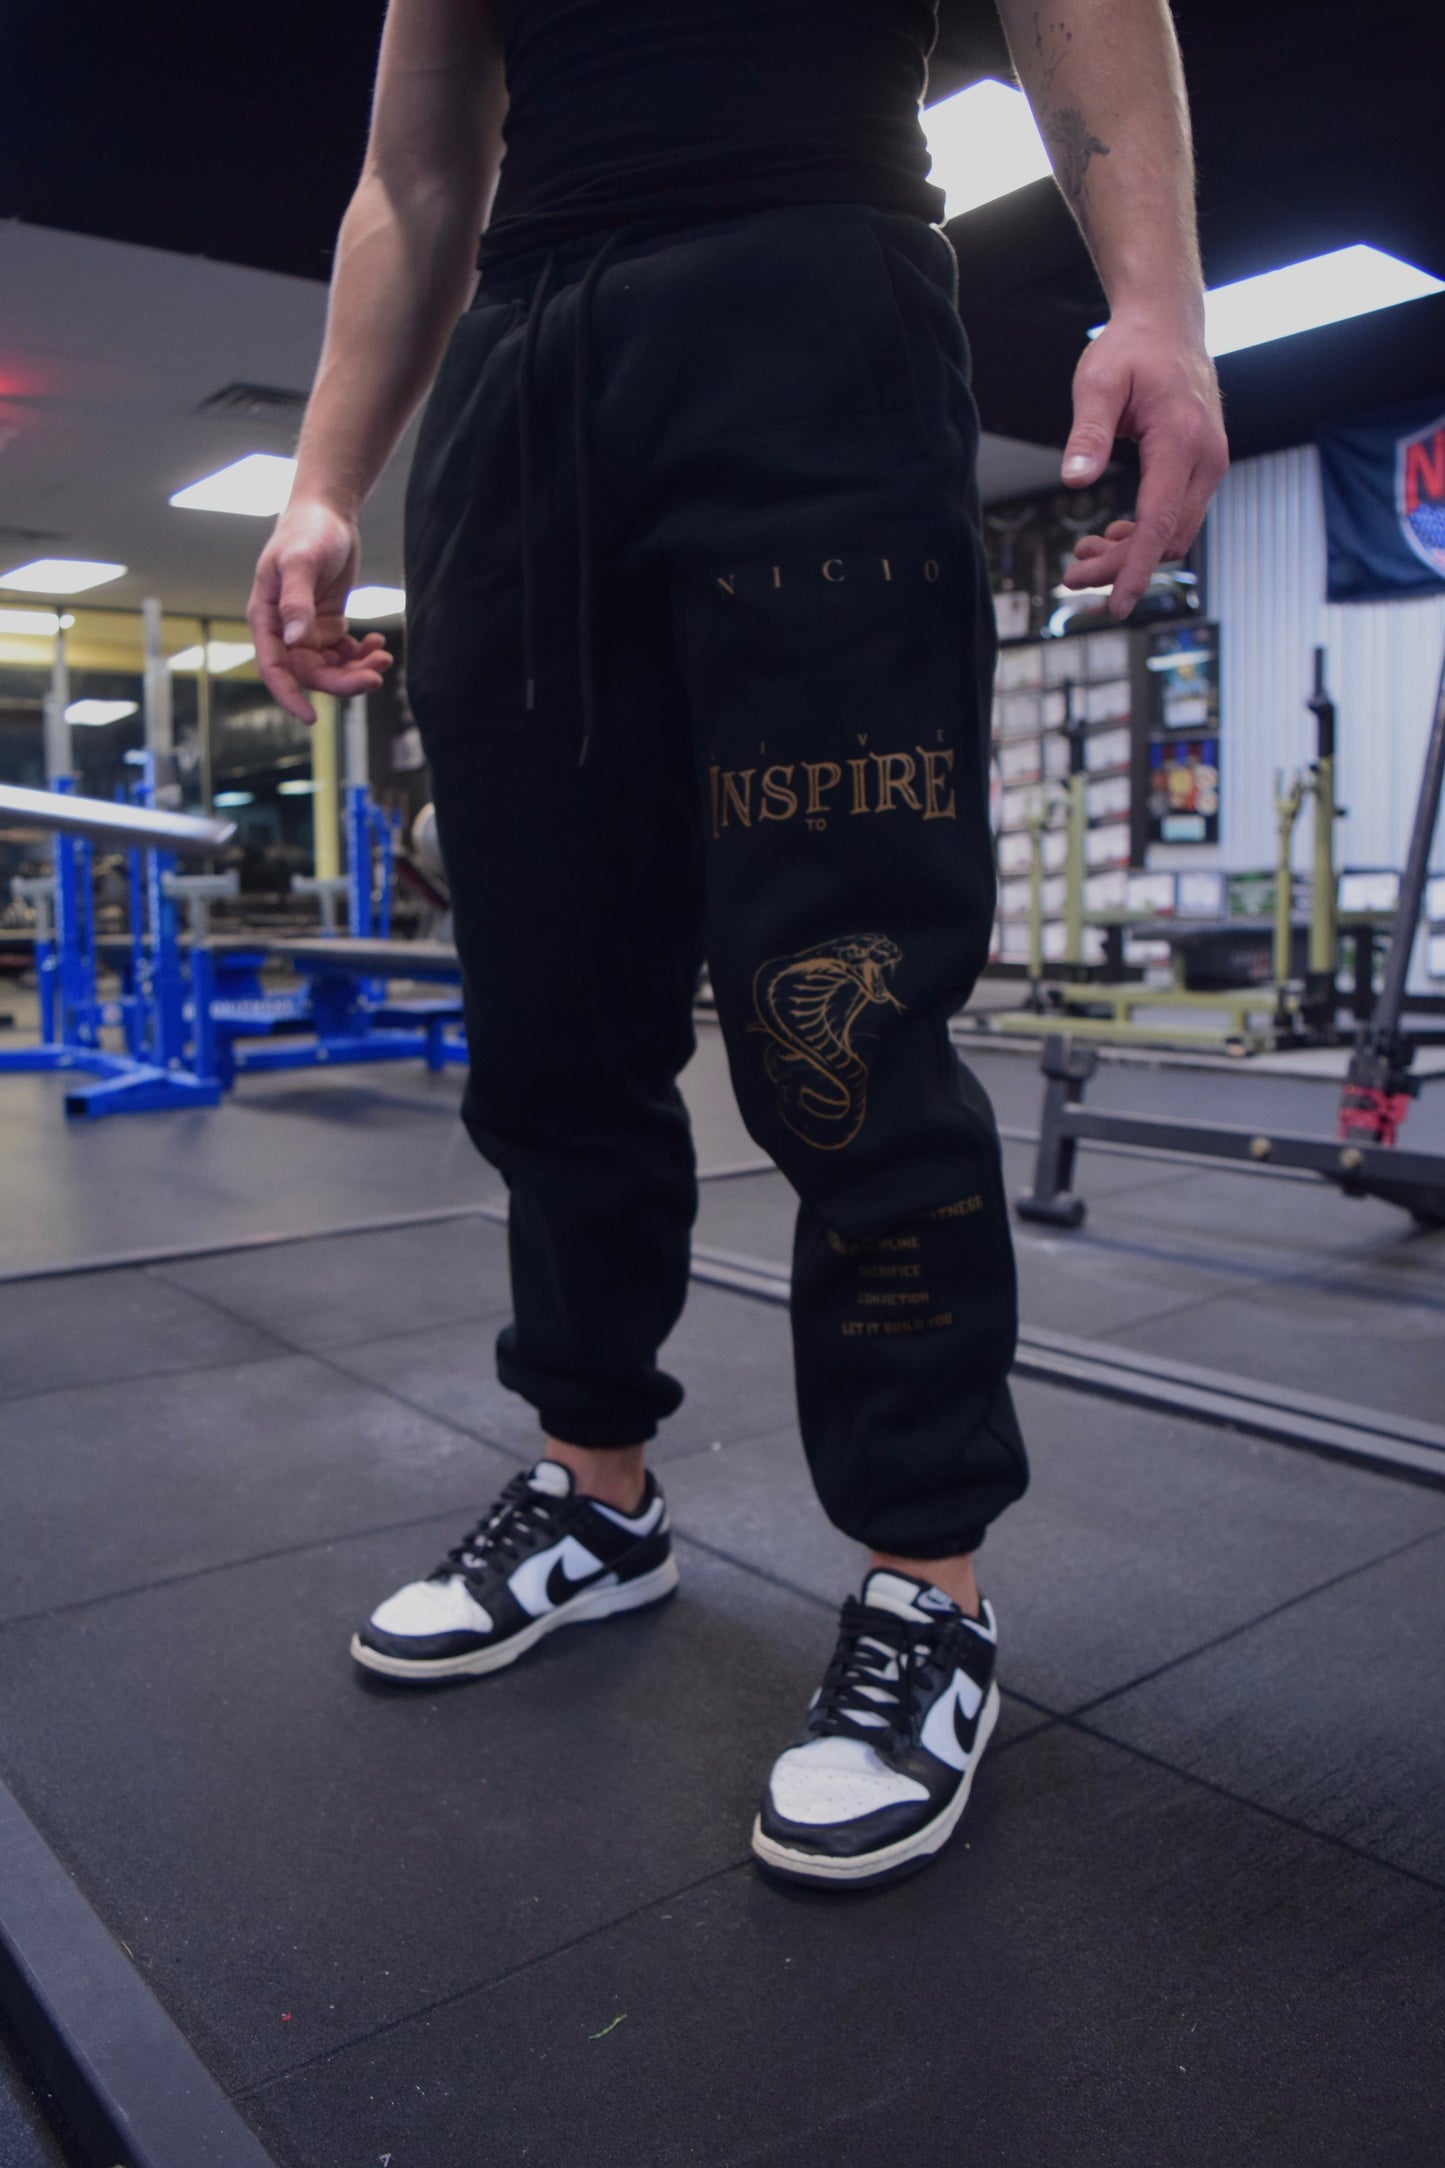 LIVE TO INSPIRE - Joggers Gold